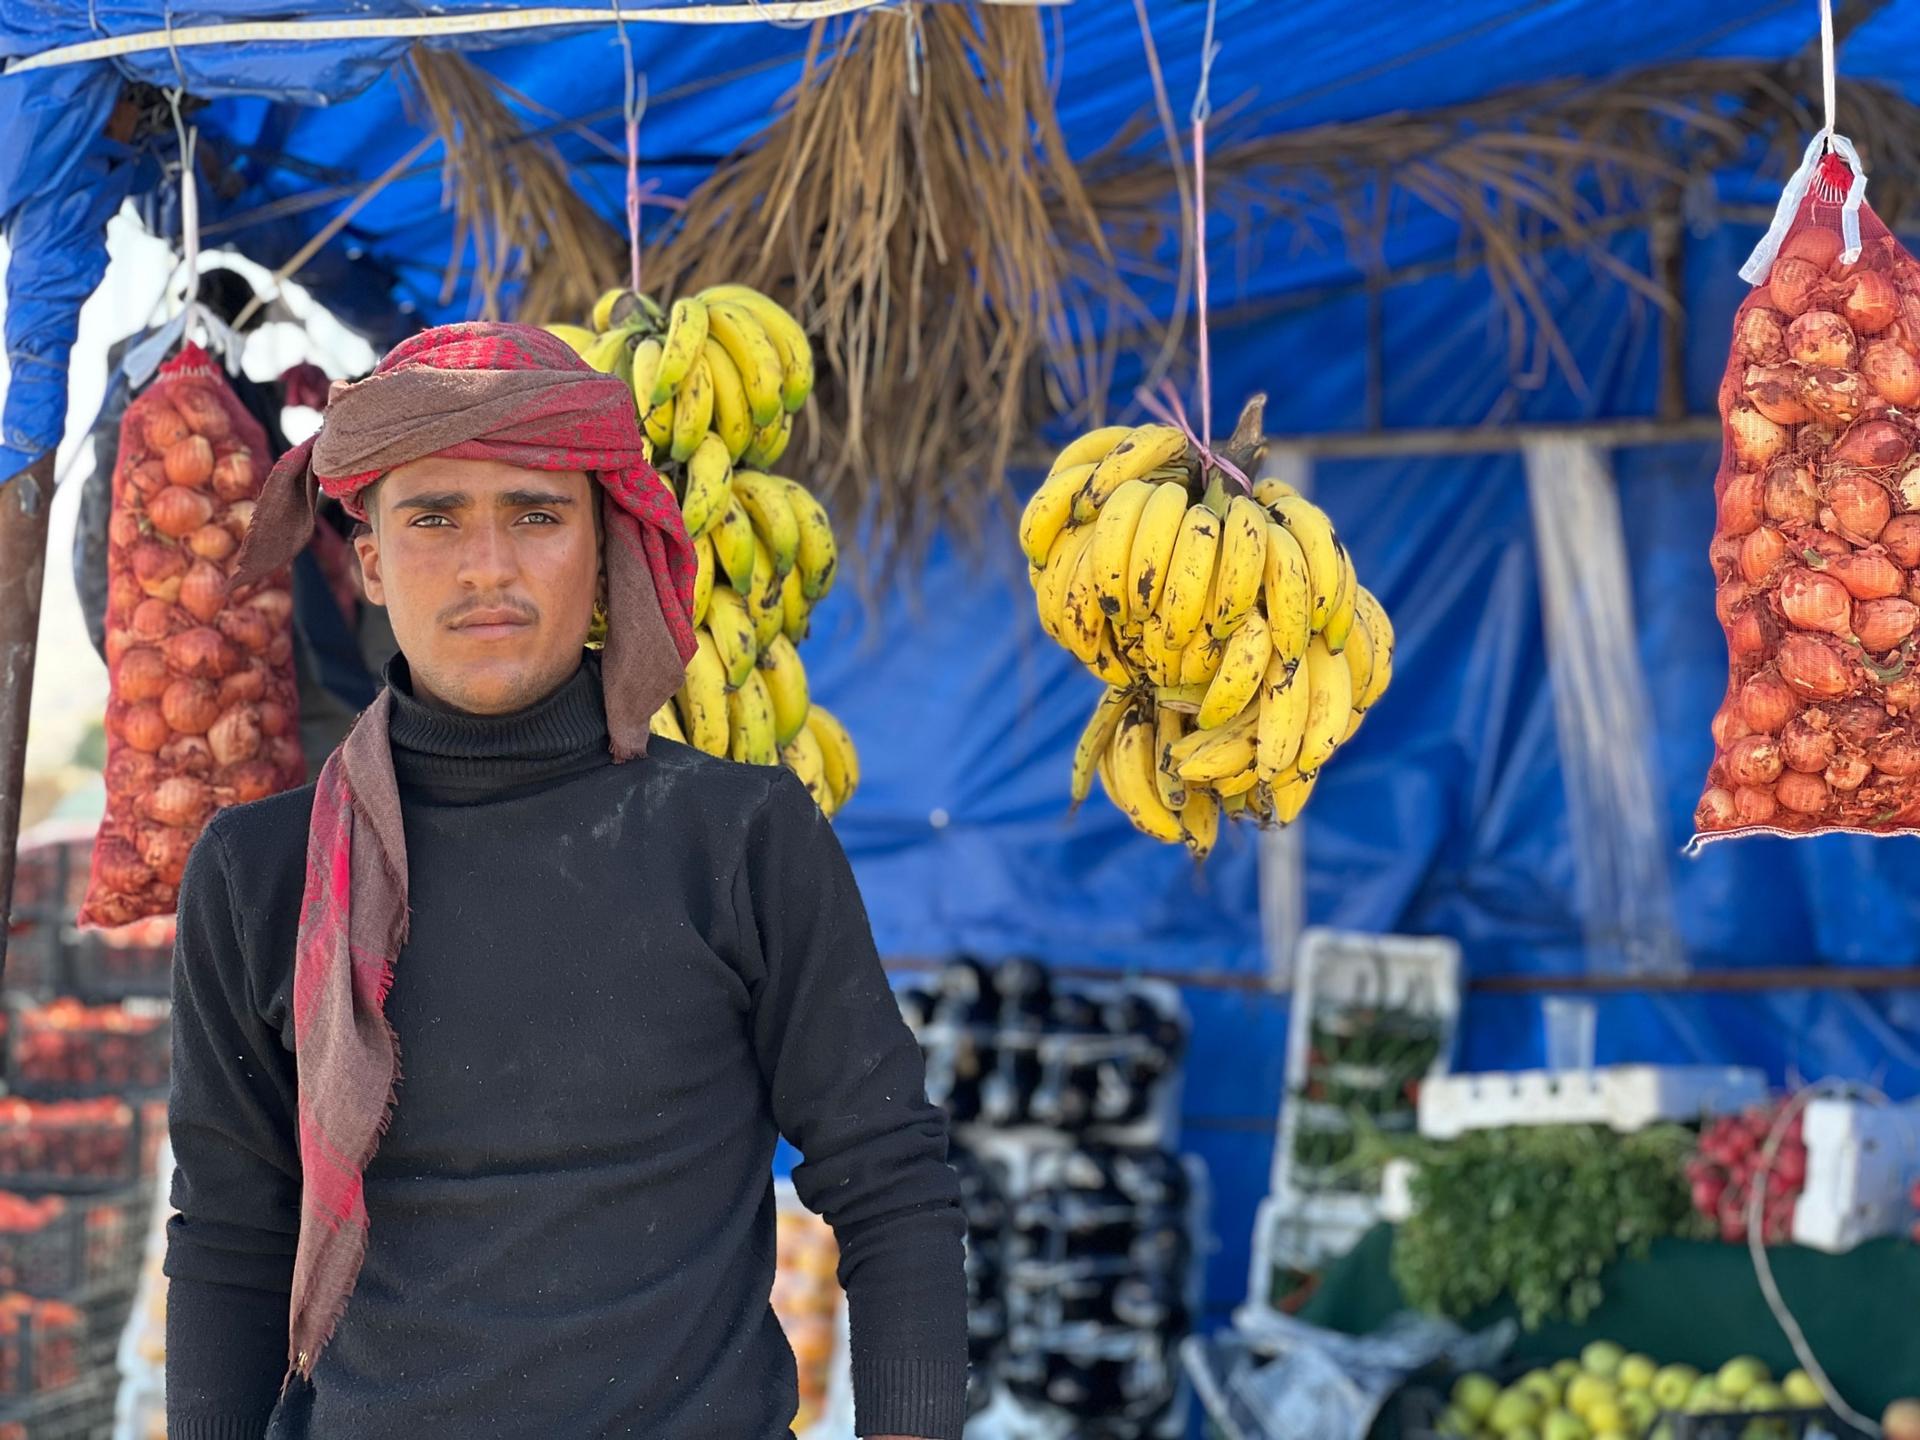 Mabrouk Abdullah, 21, is from Yemen. He sells fruits by the side of the road in the Jordan Valley.